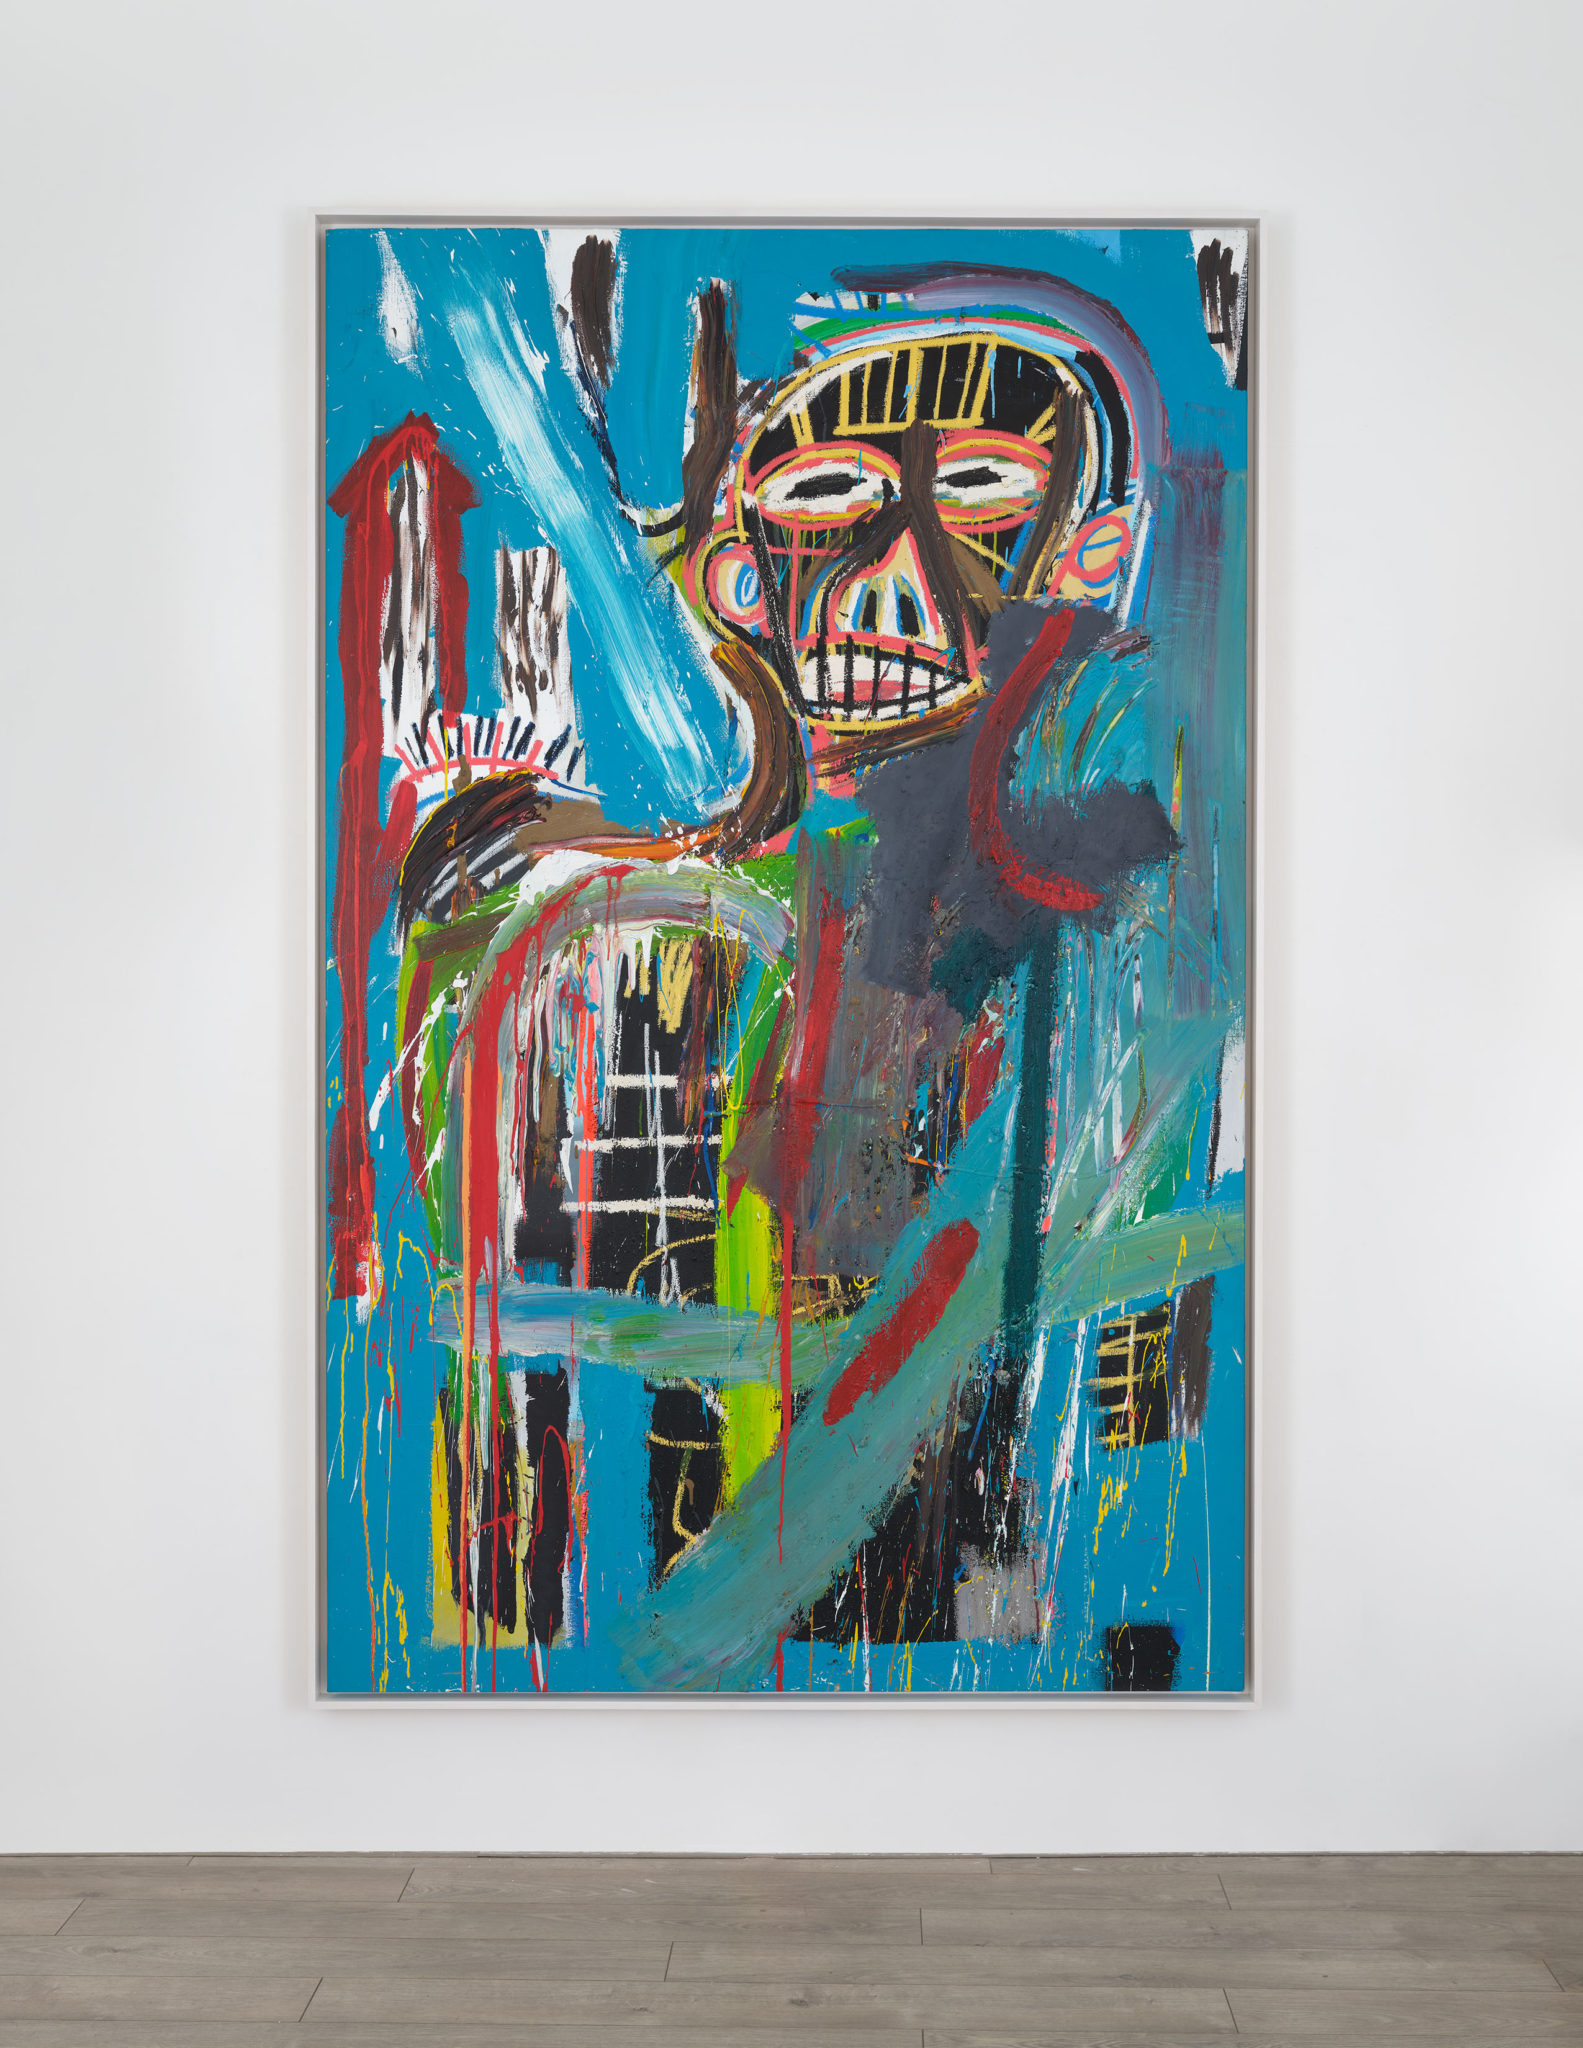 Installation view of Jean-Michel Basquiat's painting Untitled (1982)